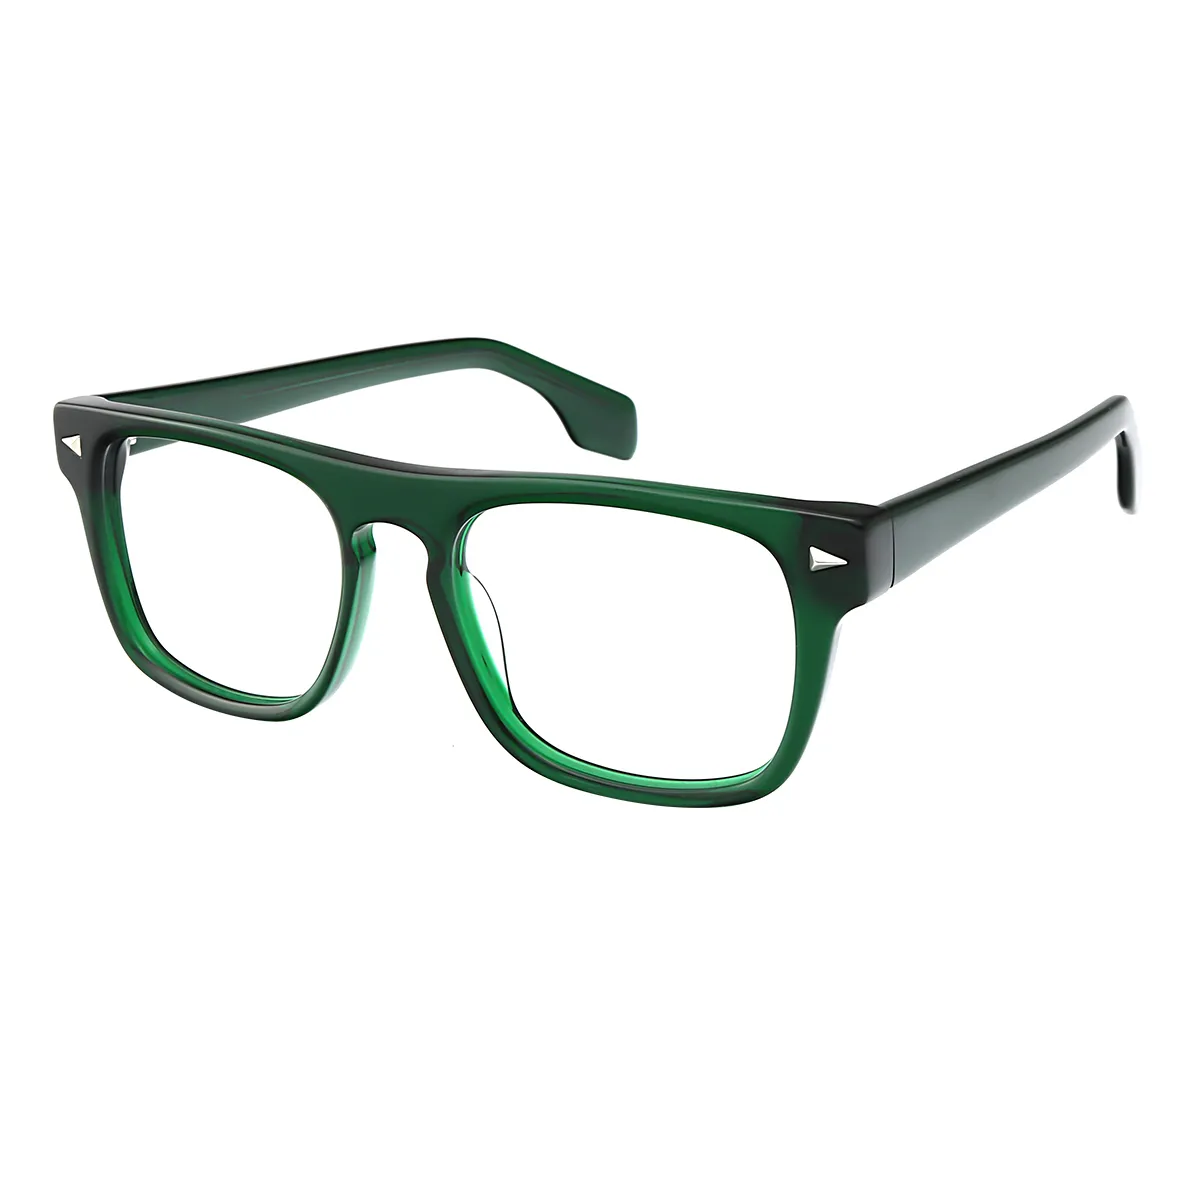 Carlyle - Square Green Glasses for Men & Women